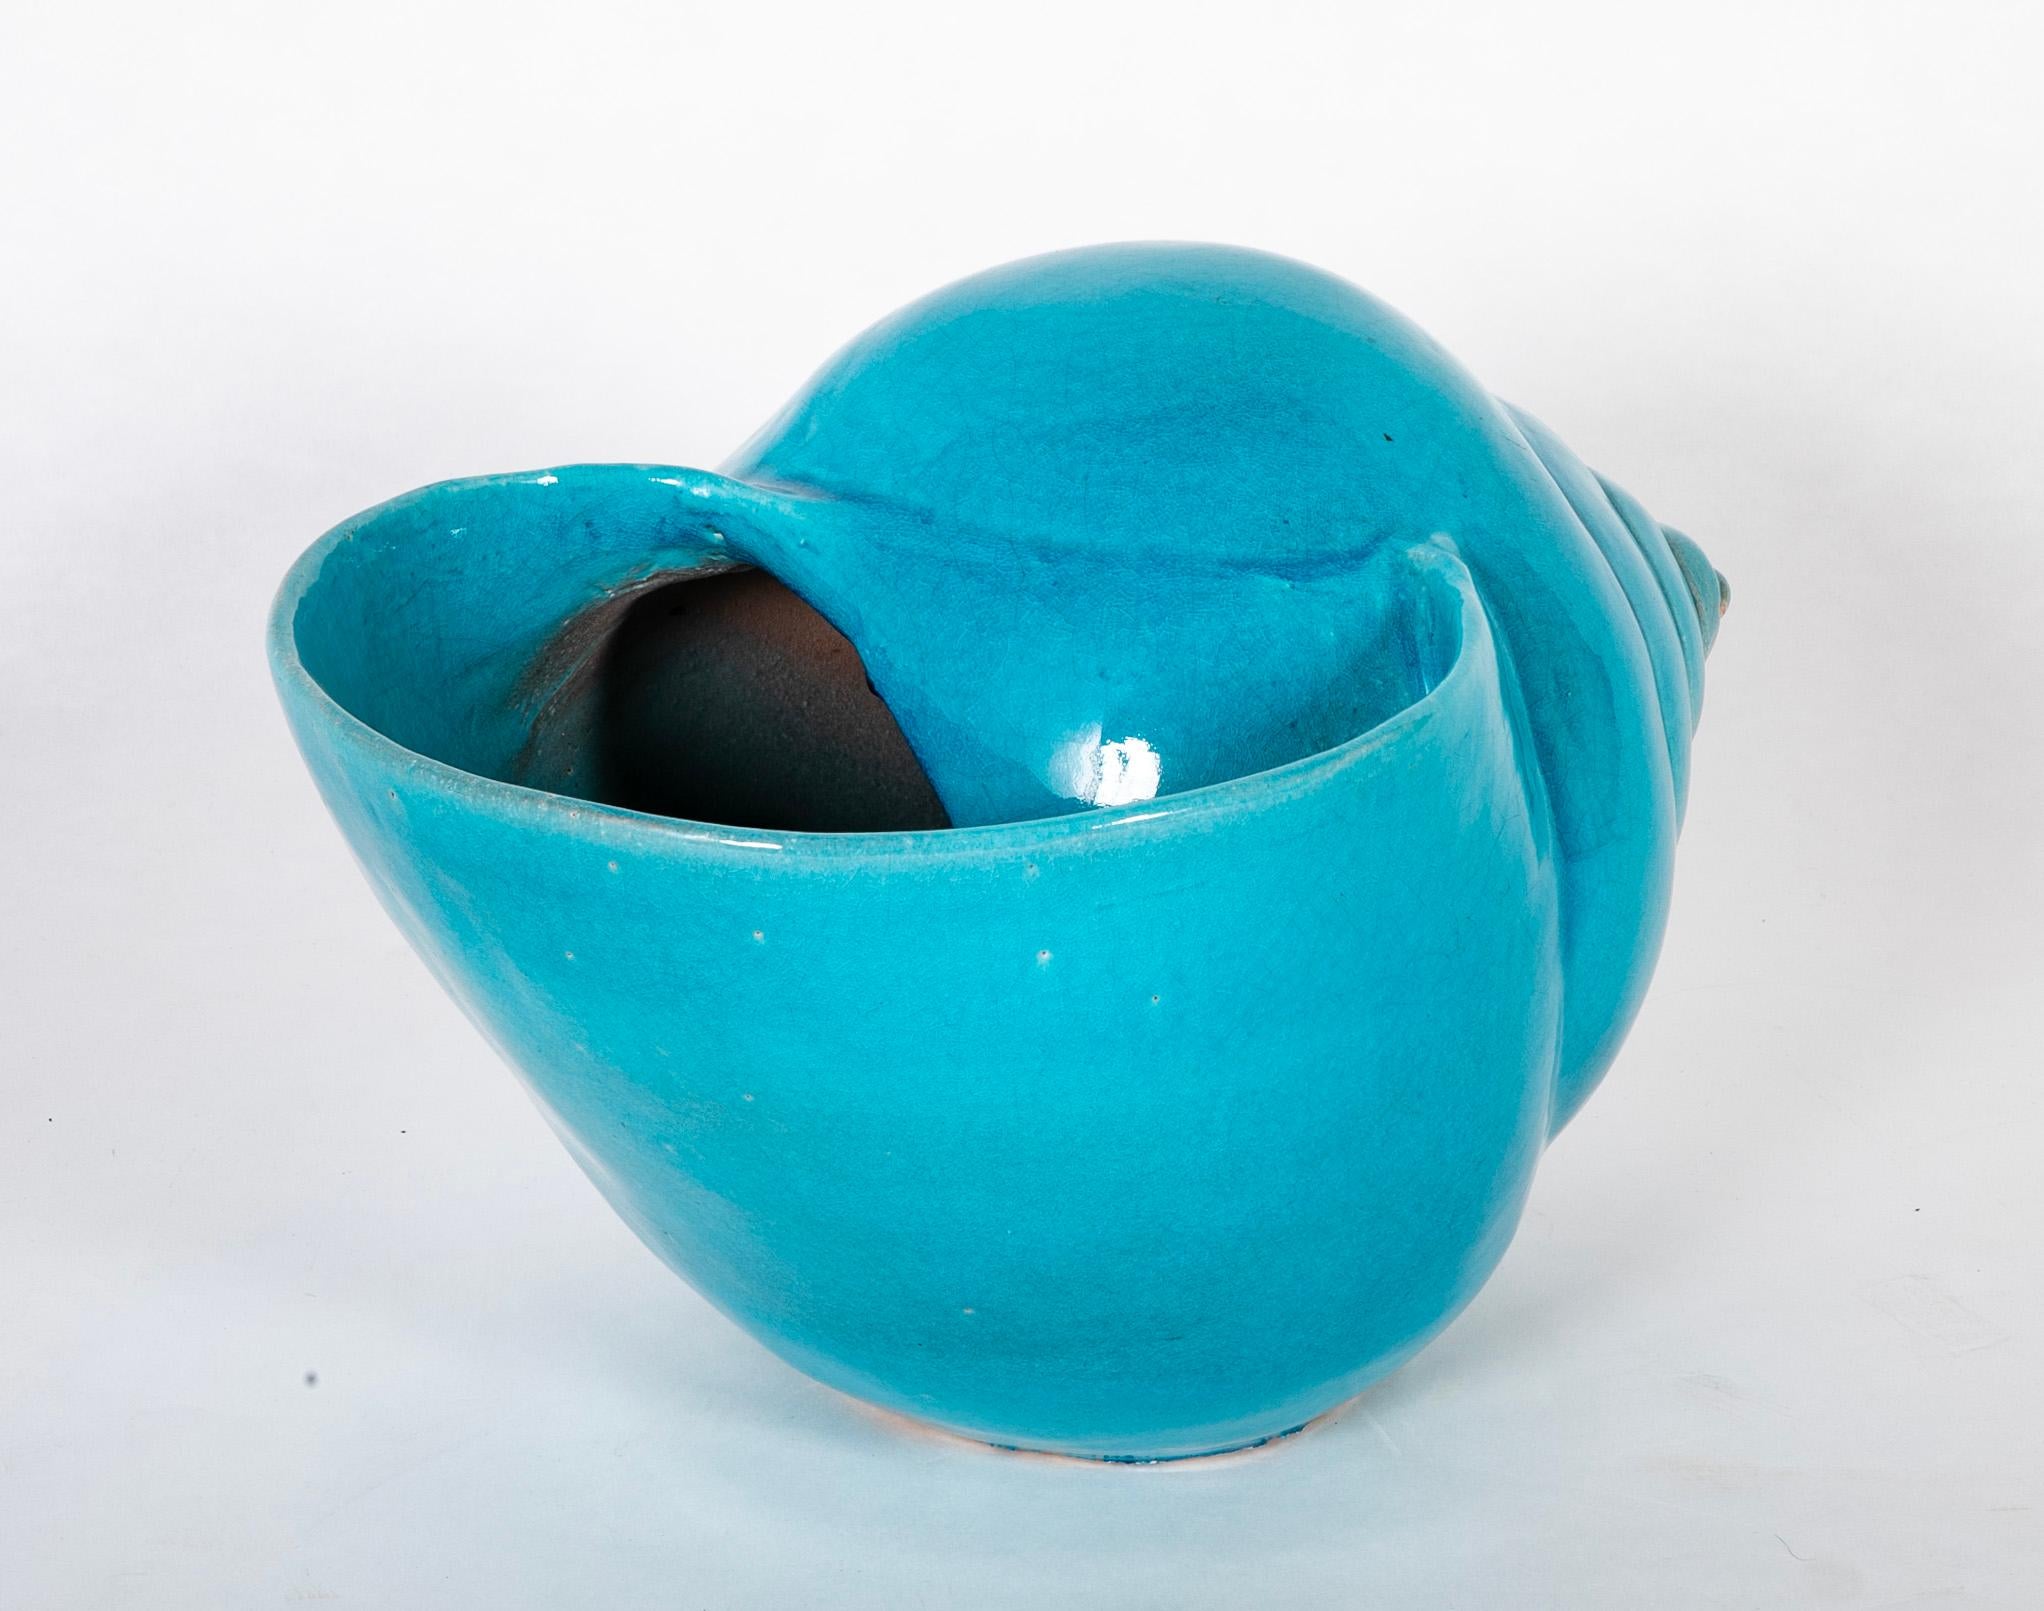 Turquoise Blue Glazed Sea Shell Vase Jardiniere Planter, Large Scale For Sale 1